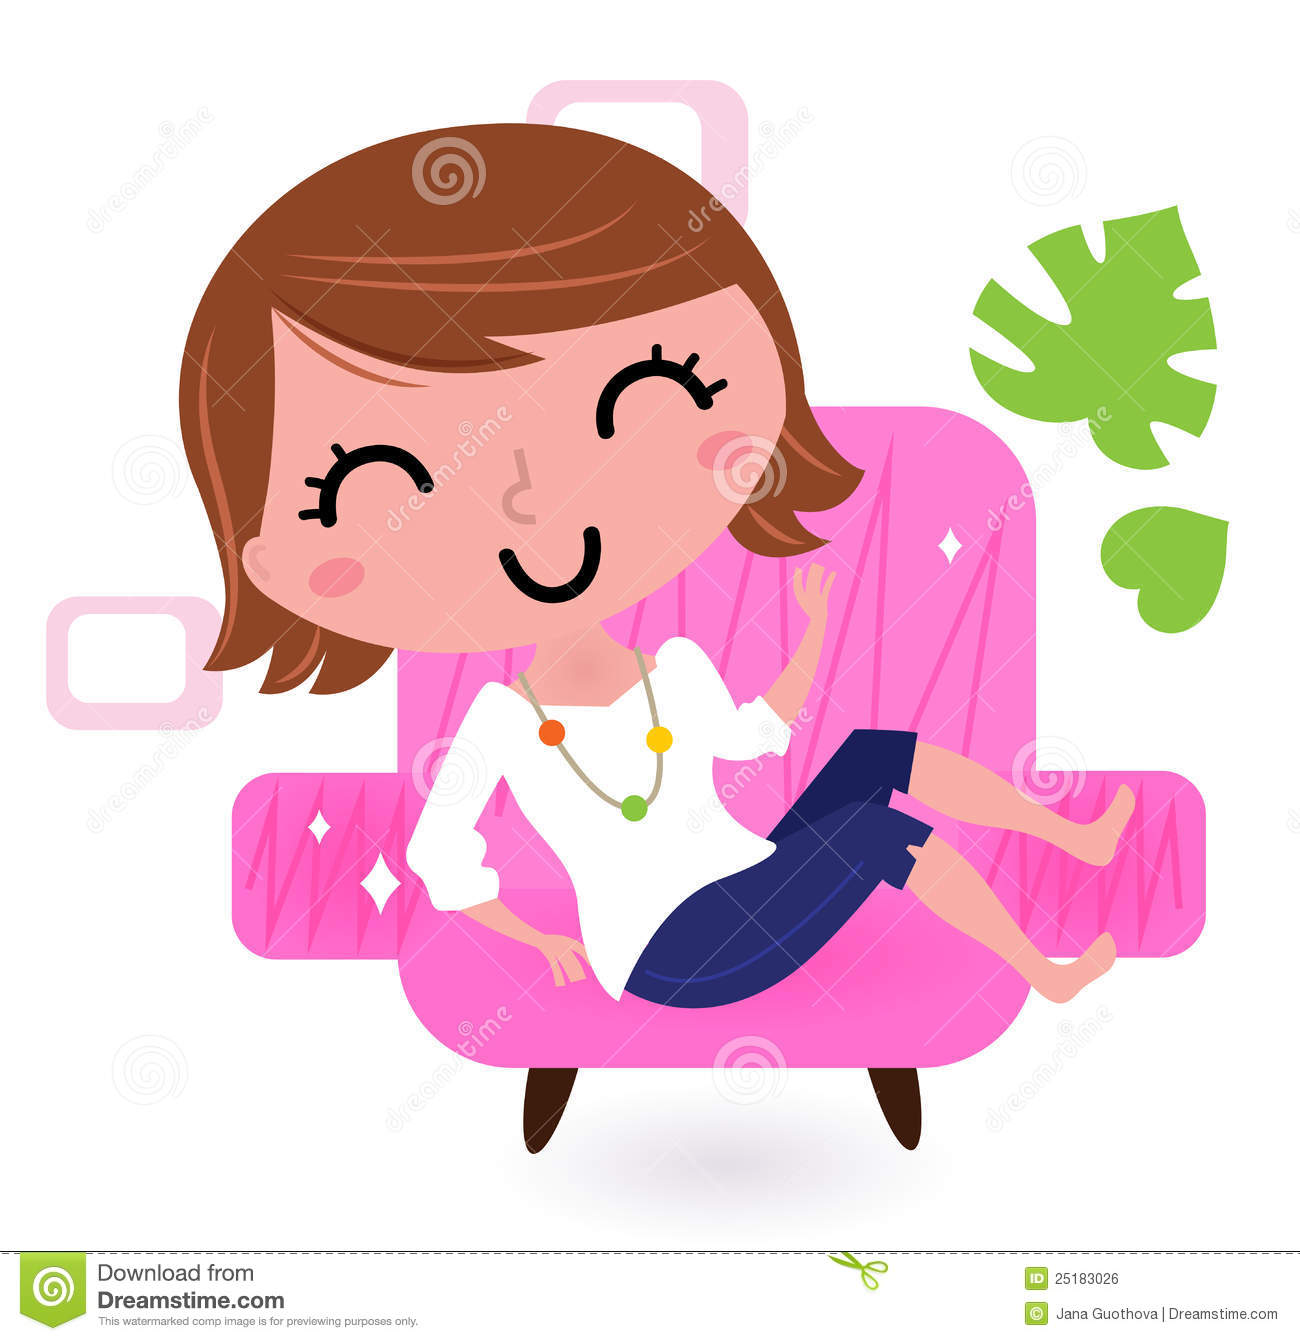 Woman Relaxing In Sofa Royalty Free Stock Image   Image  25183026